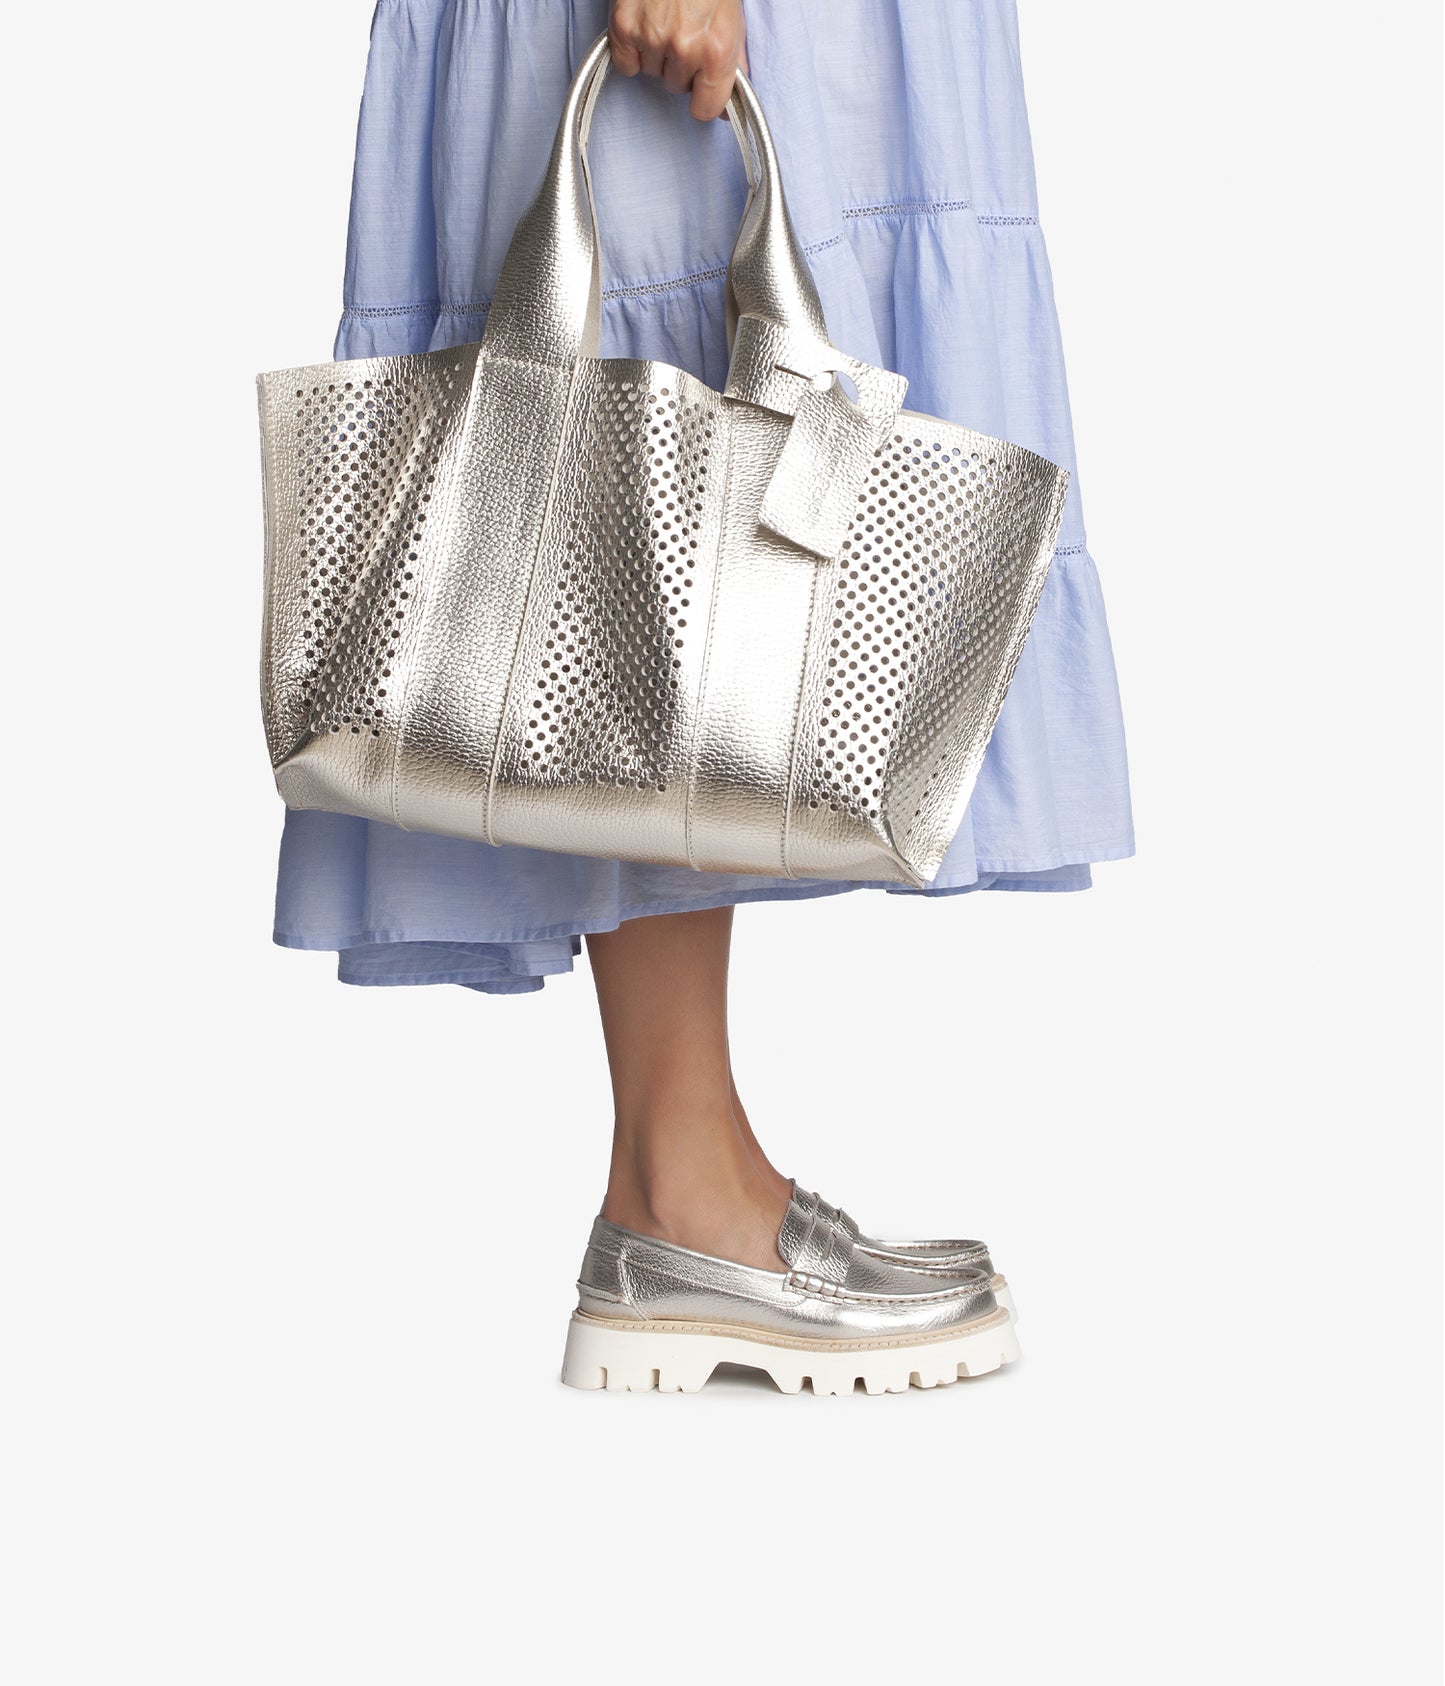 perfed tote / sterling cervo lame